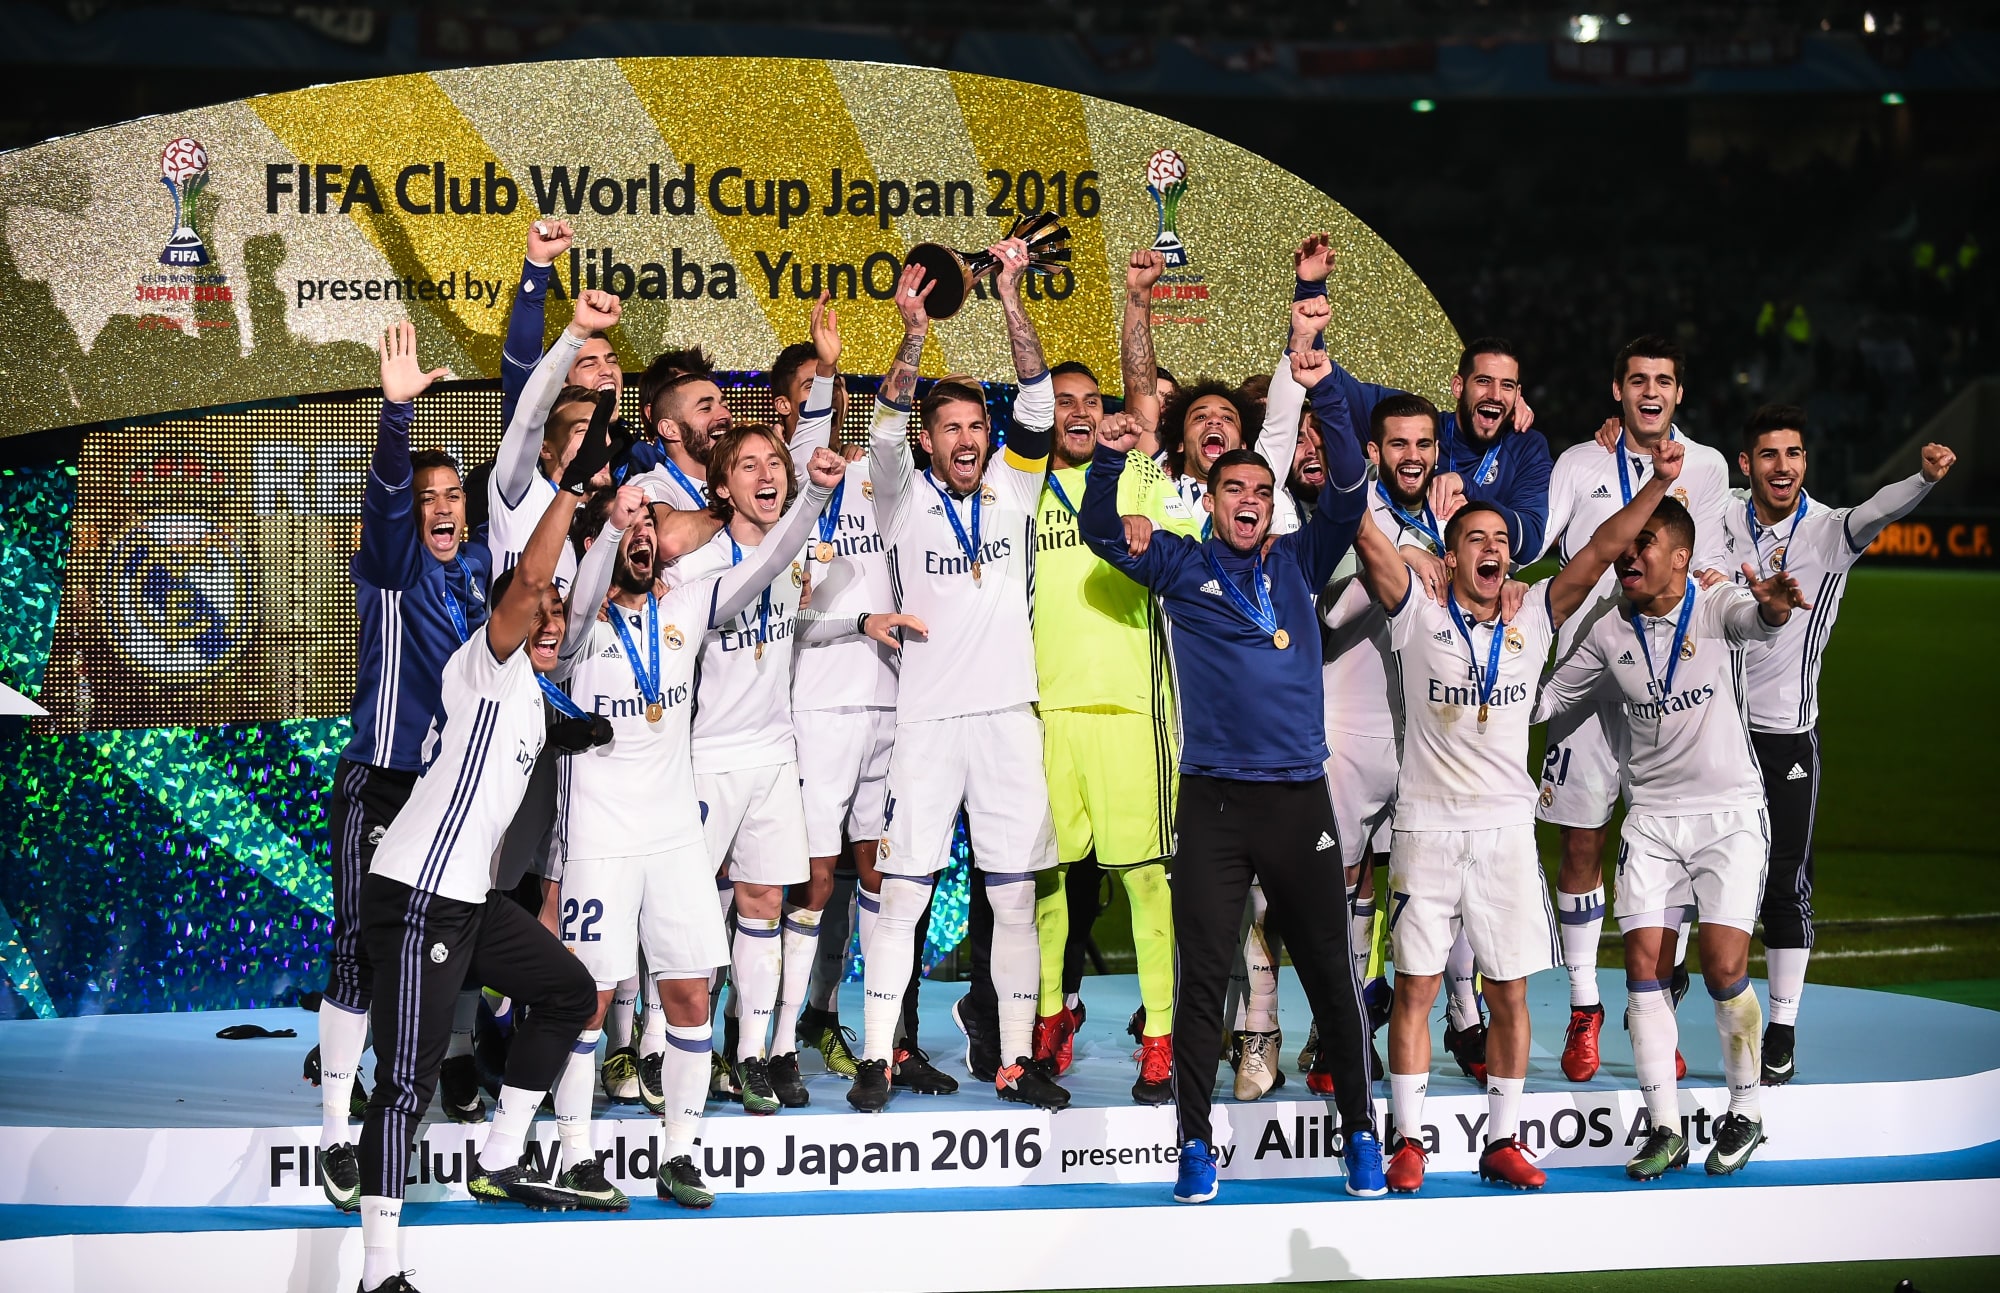 A Fan's guide to the FIFA Club World Cup